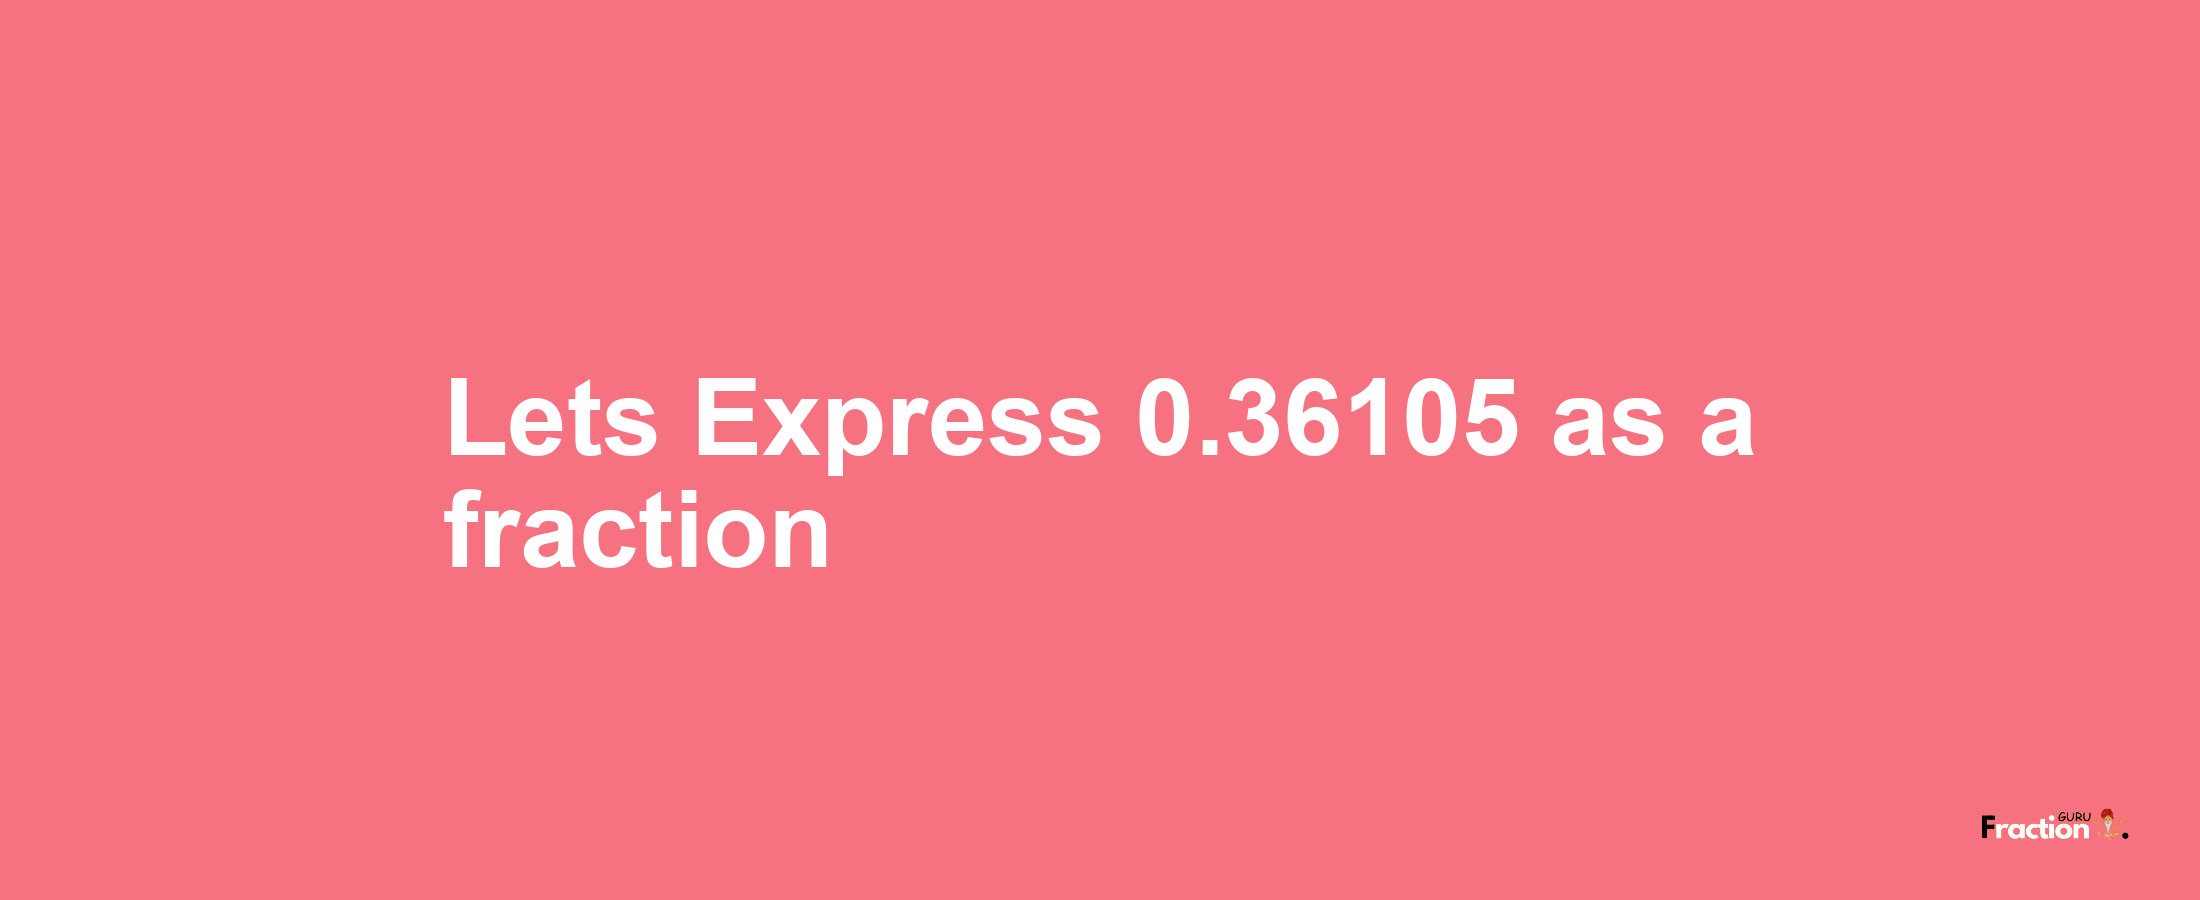 Lets Express 0.36105 as afraction